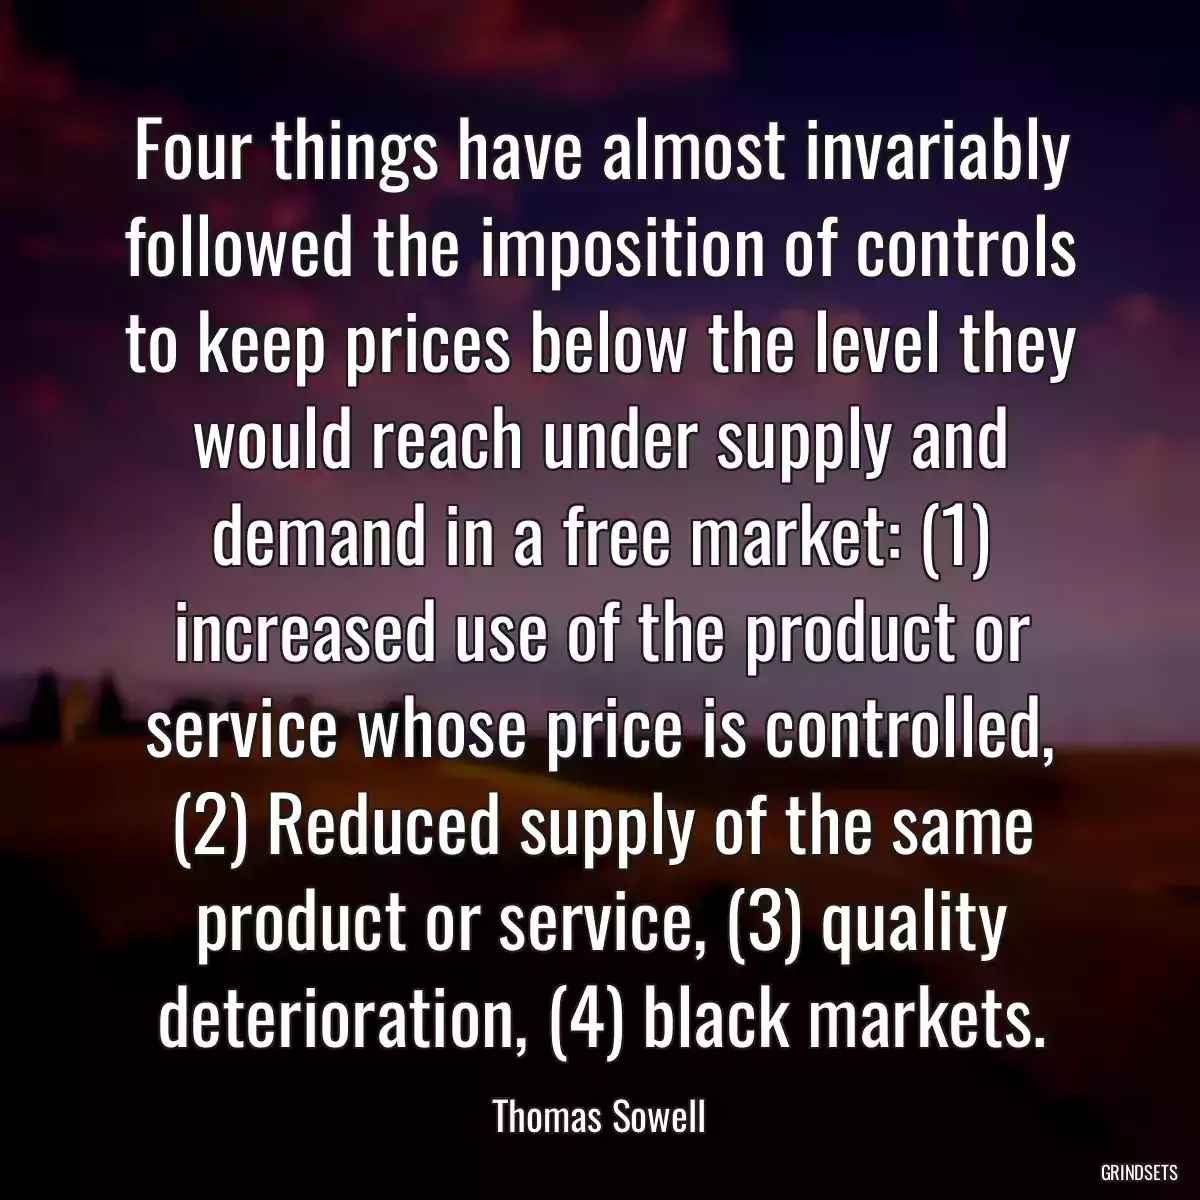 Four things have almost invariably followed the imposition of controls to keep prices below the level they would reach under supply and demand in a free market: (1) increased use of the product or service whose price is controlled, (2) Reduced supply of the same product or service, (3) quality deterioration, (4) black markets.